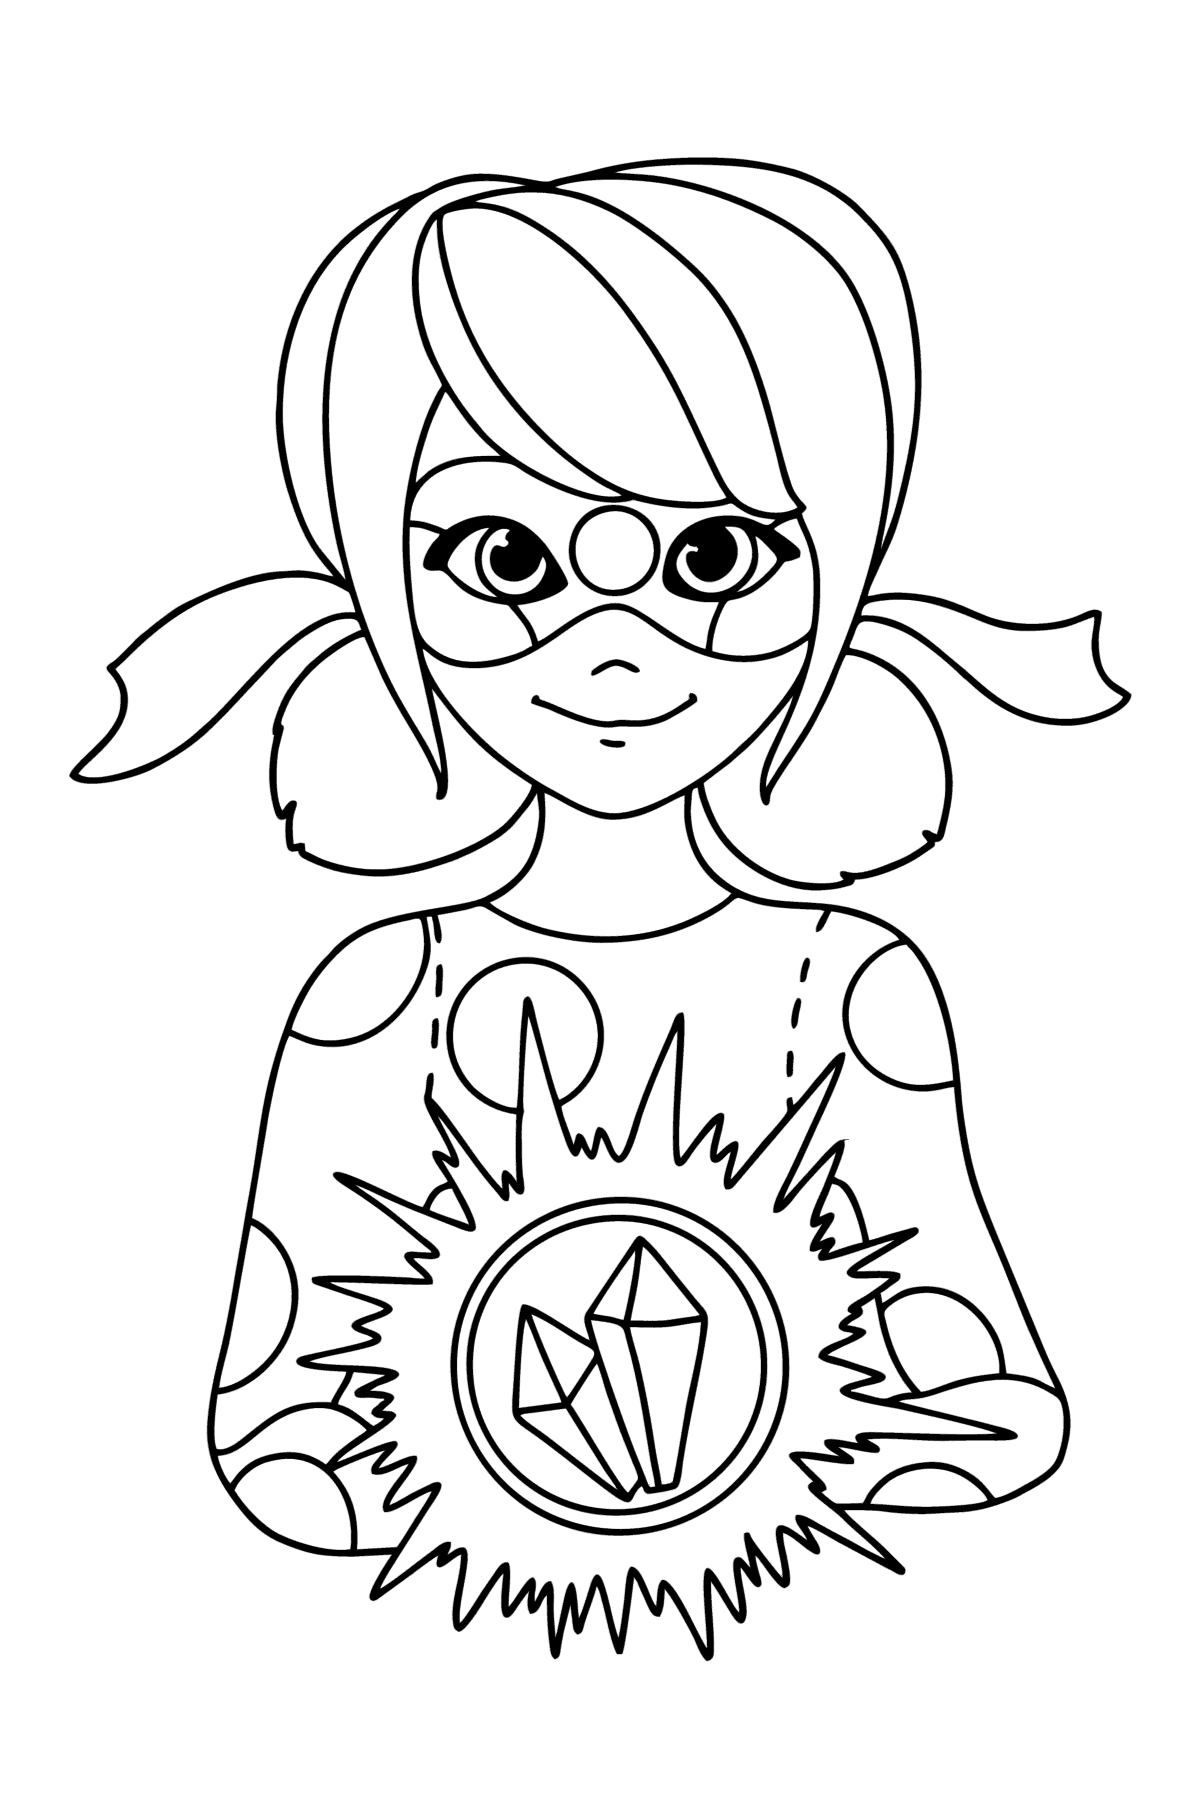 Lady Ice coloring page - Coloring Pages for Kids